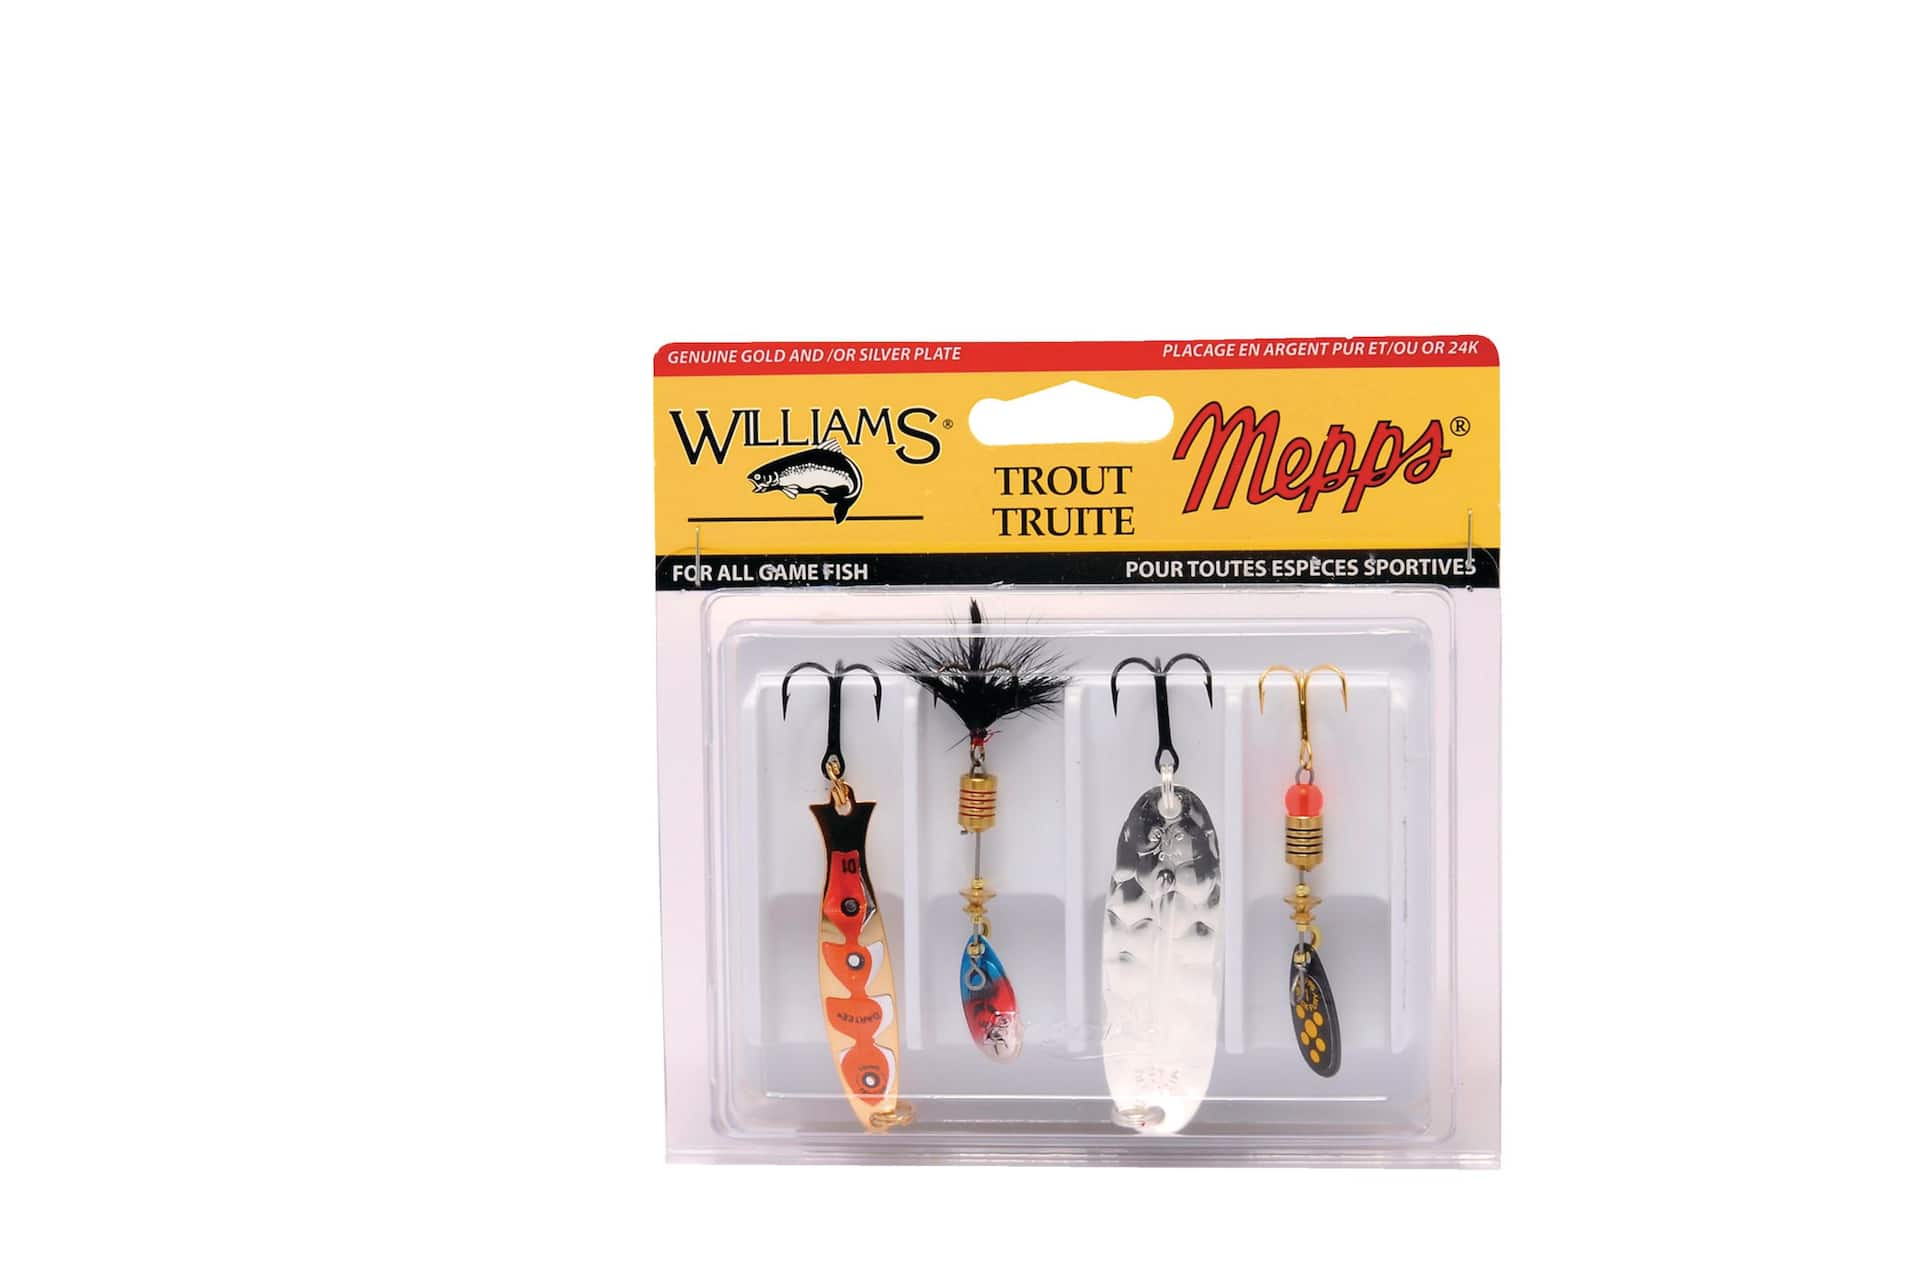 https://media-www.canadiantire.ca/product/playing/fishing/fishing-lures/0770992/williams-mepps-mixed-trout-4-pack-22465595-87e2-42b9-bce0-f5c02dd1860d-jpgrendition.jpg